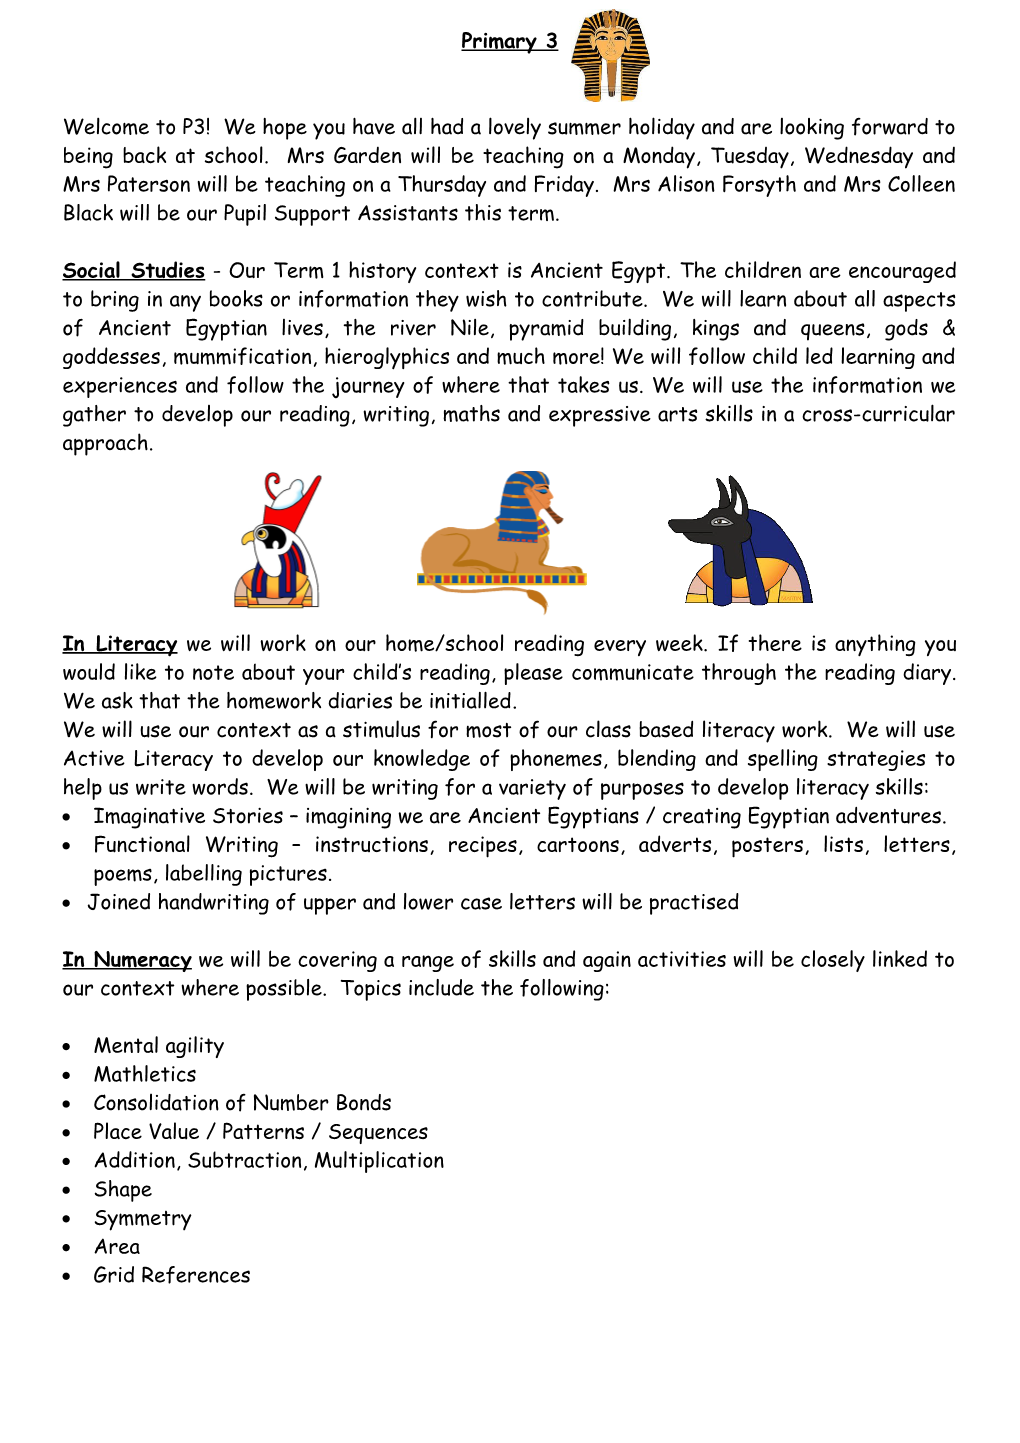 Social Studies - Our Term 1 History Context Isancient Egypt.The Children Are Encouraged